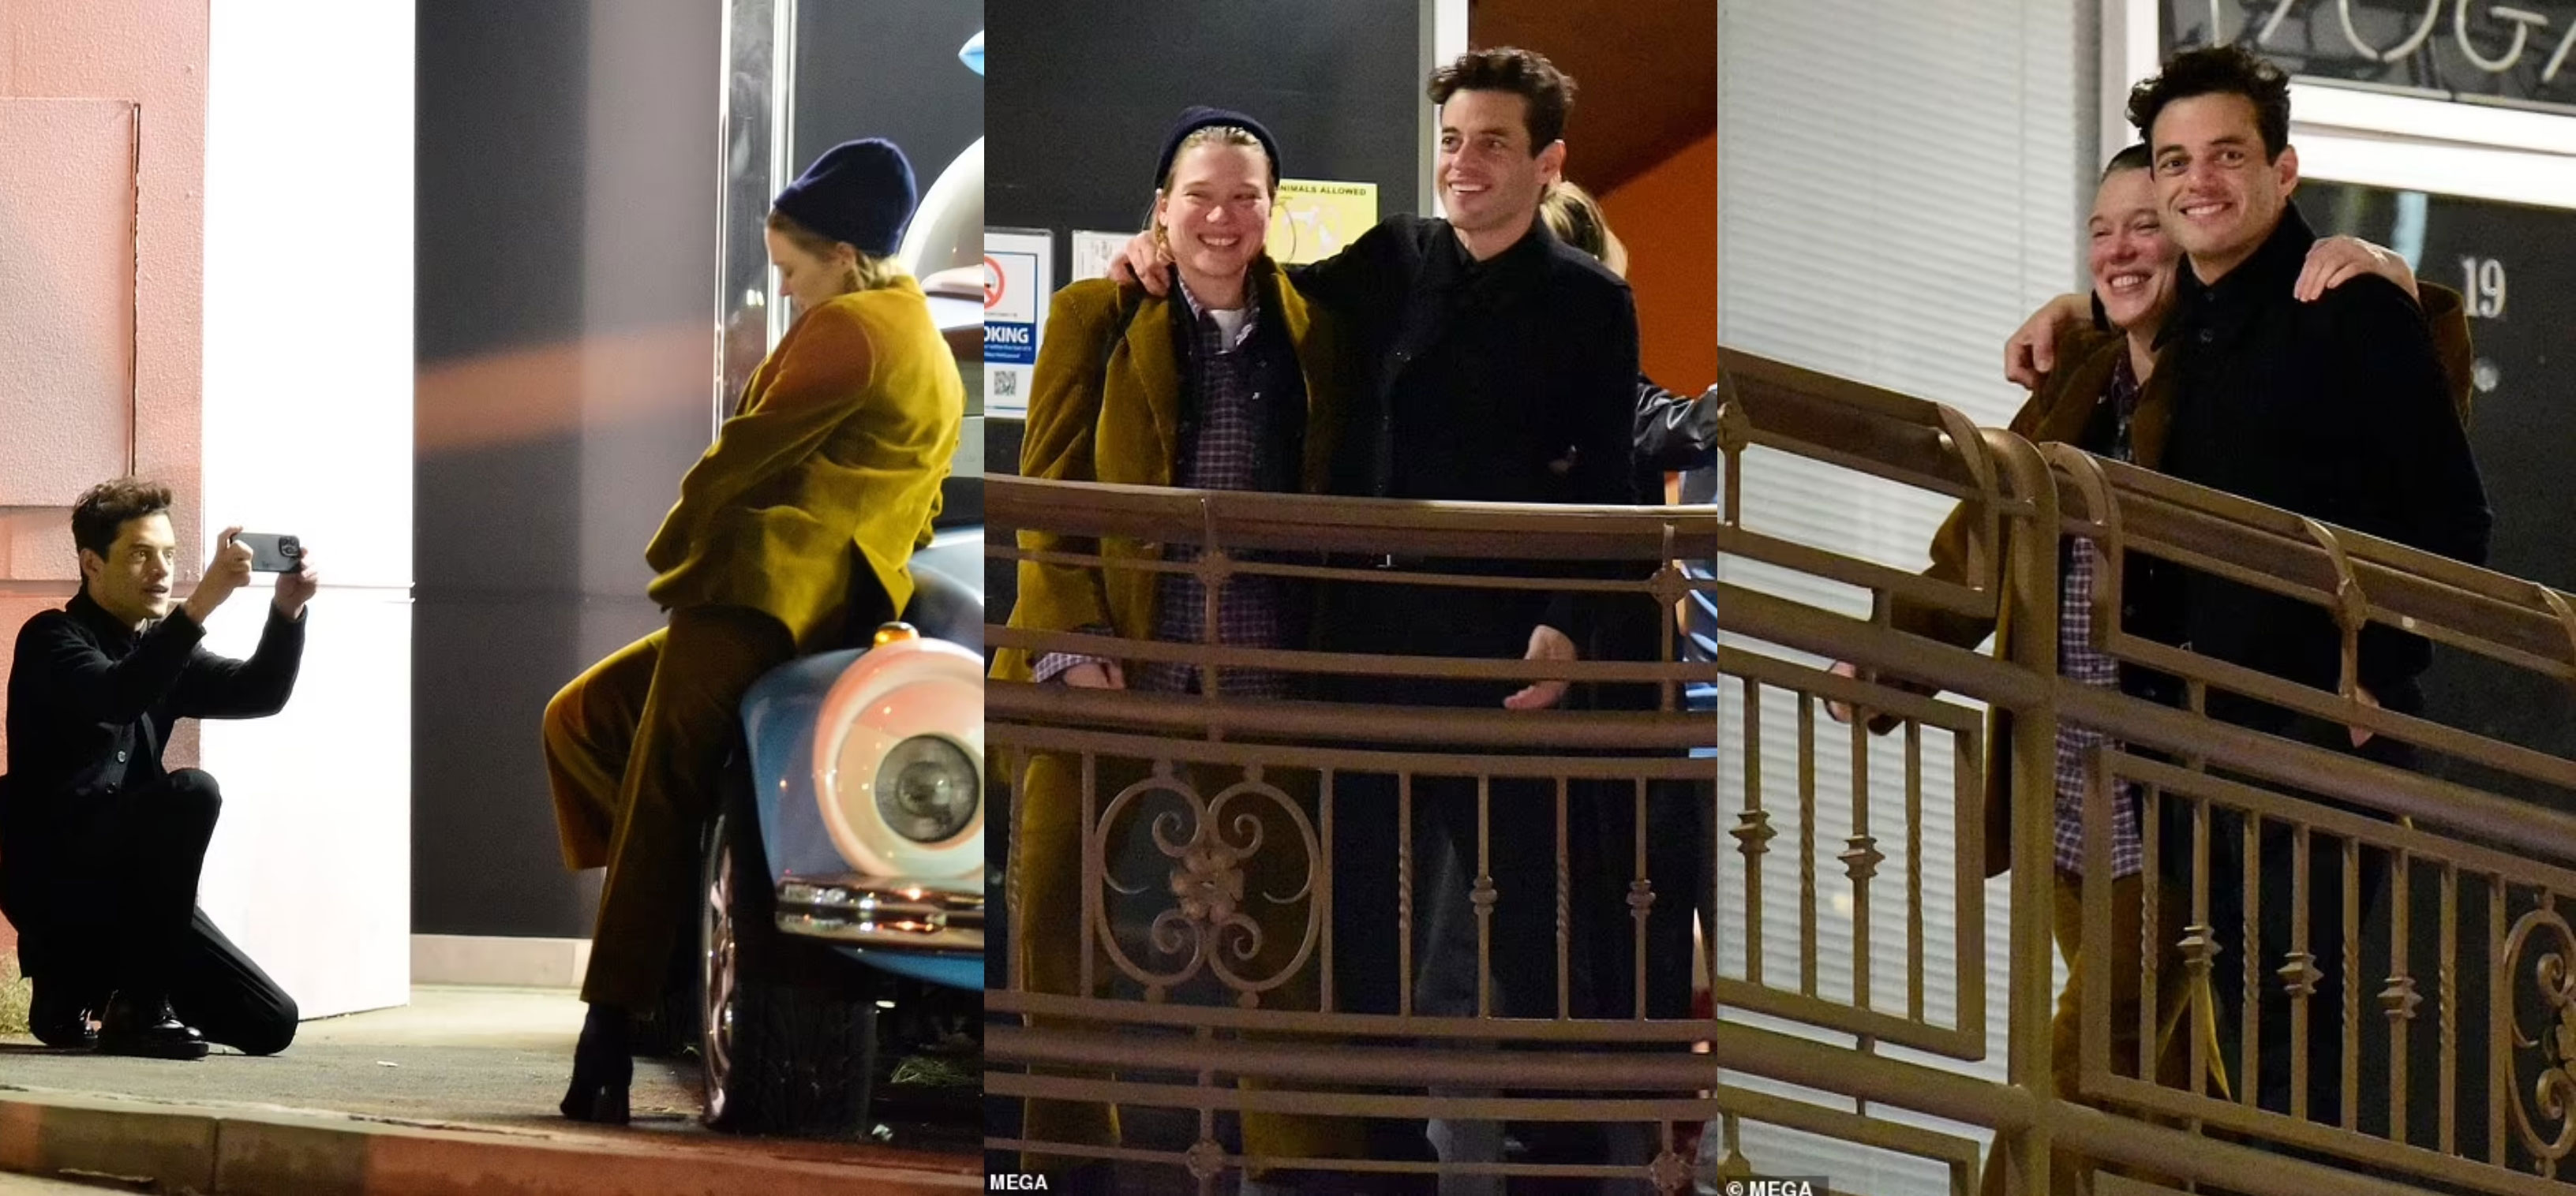 Rami Malek and Lea Seydoux look cosy together after intimate sushi dinner